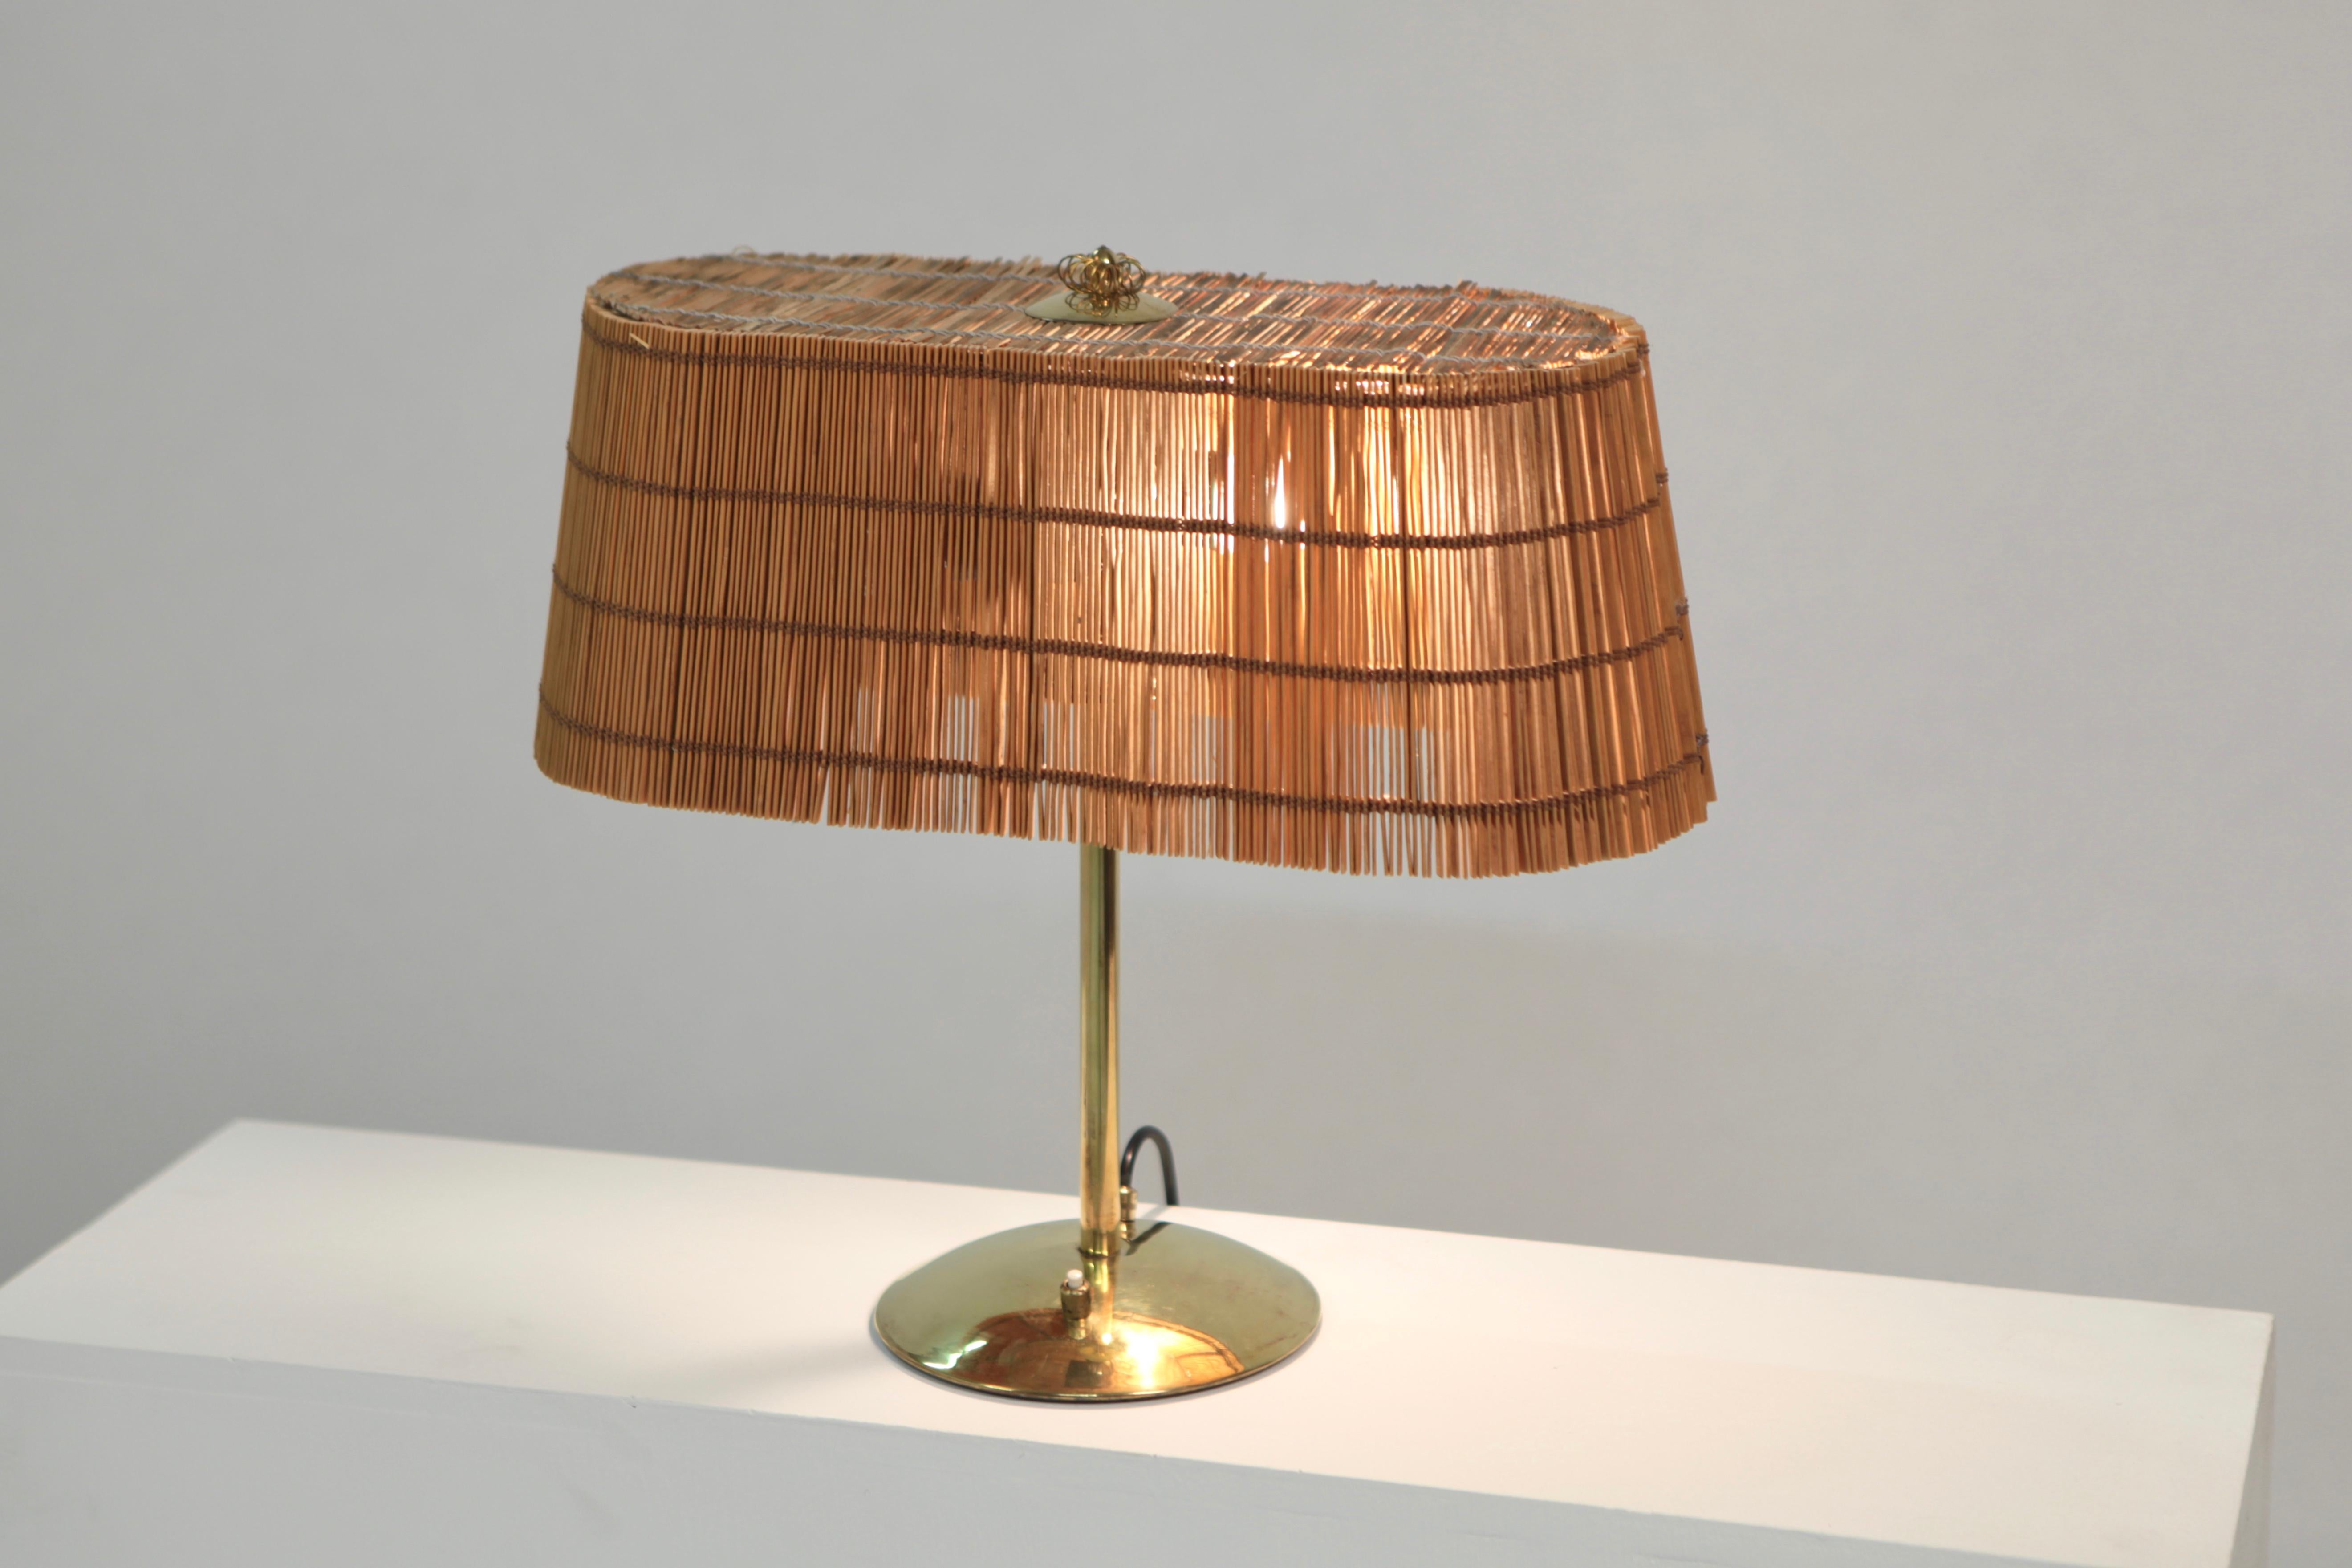 Scandinavian Modern Table Lamp, Brass and Shade Made of Splints, Lasipaino Oy, Finland, 1940s